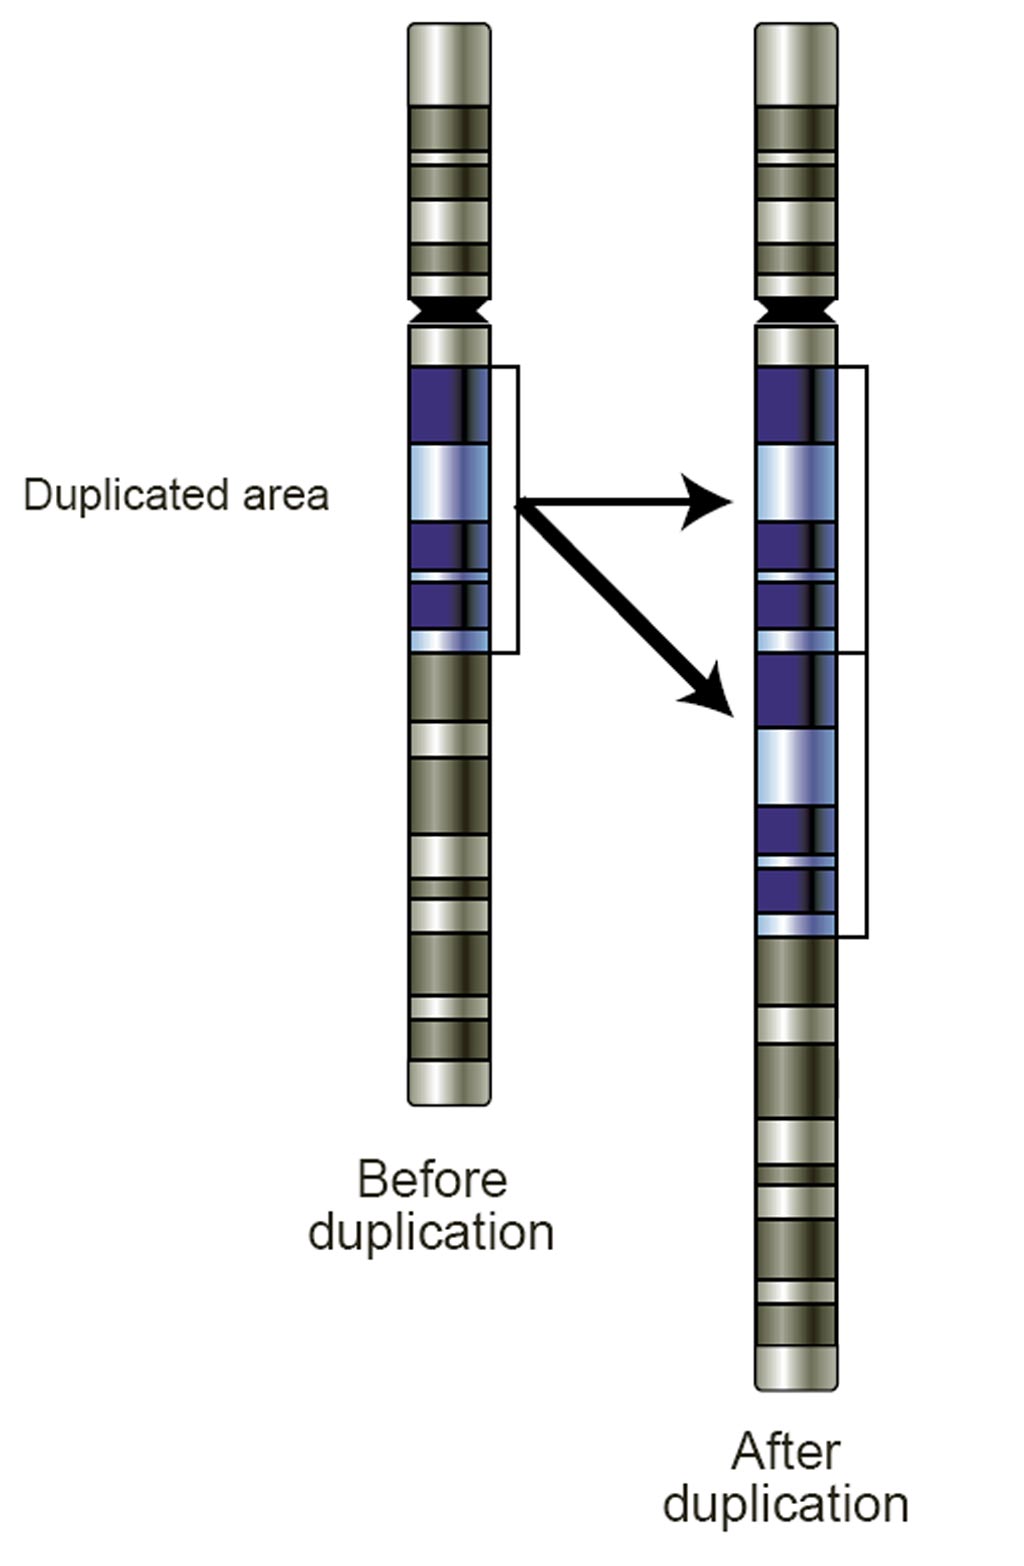 Image: This gene duplication has created a copy-number variation (CNV). The chromosome now has two copies of this section of DNA, rather than one (Photo courtesy of Wikimedia Commons).